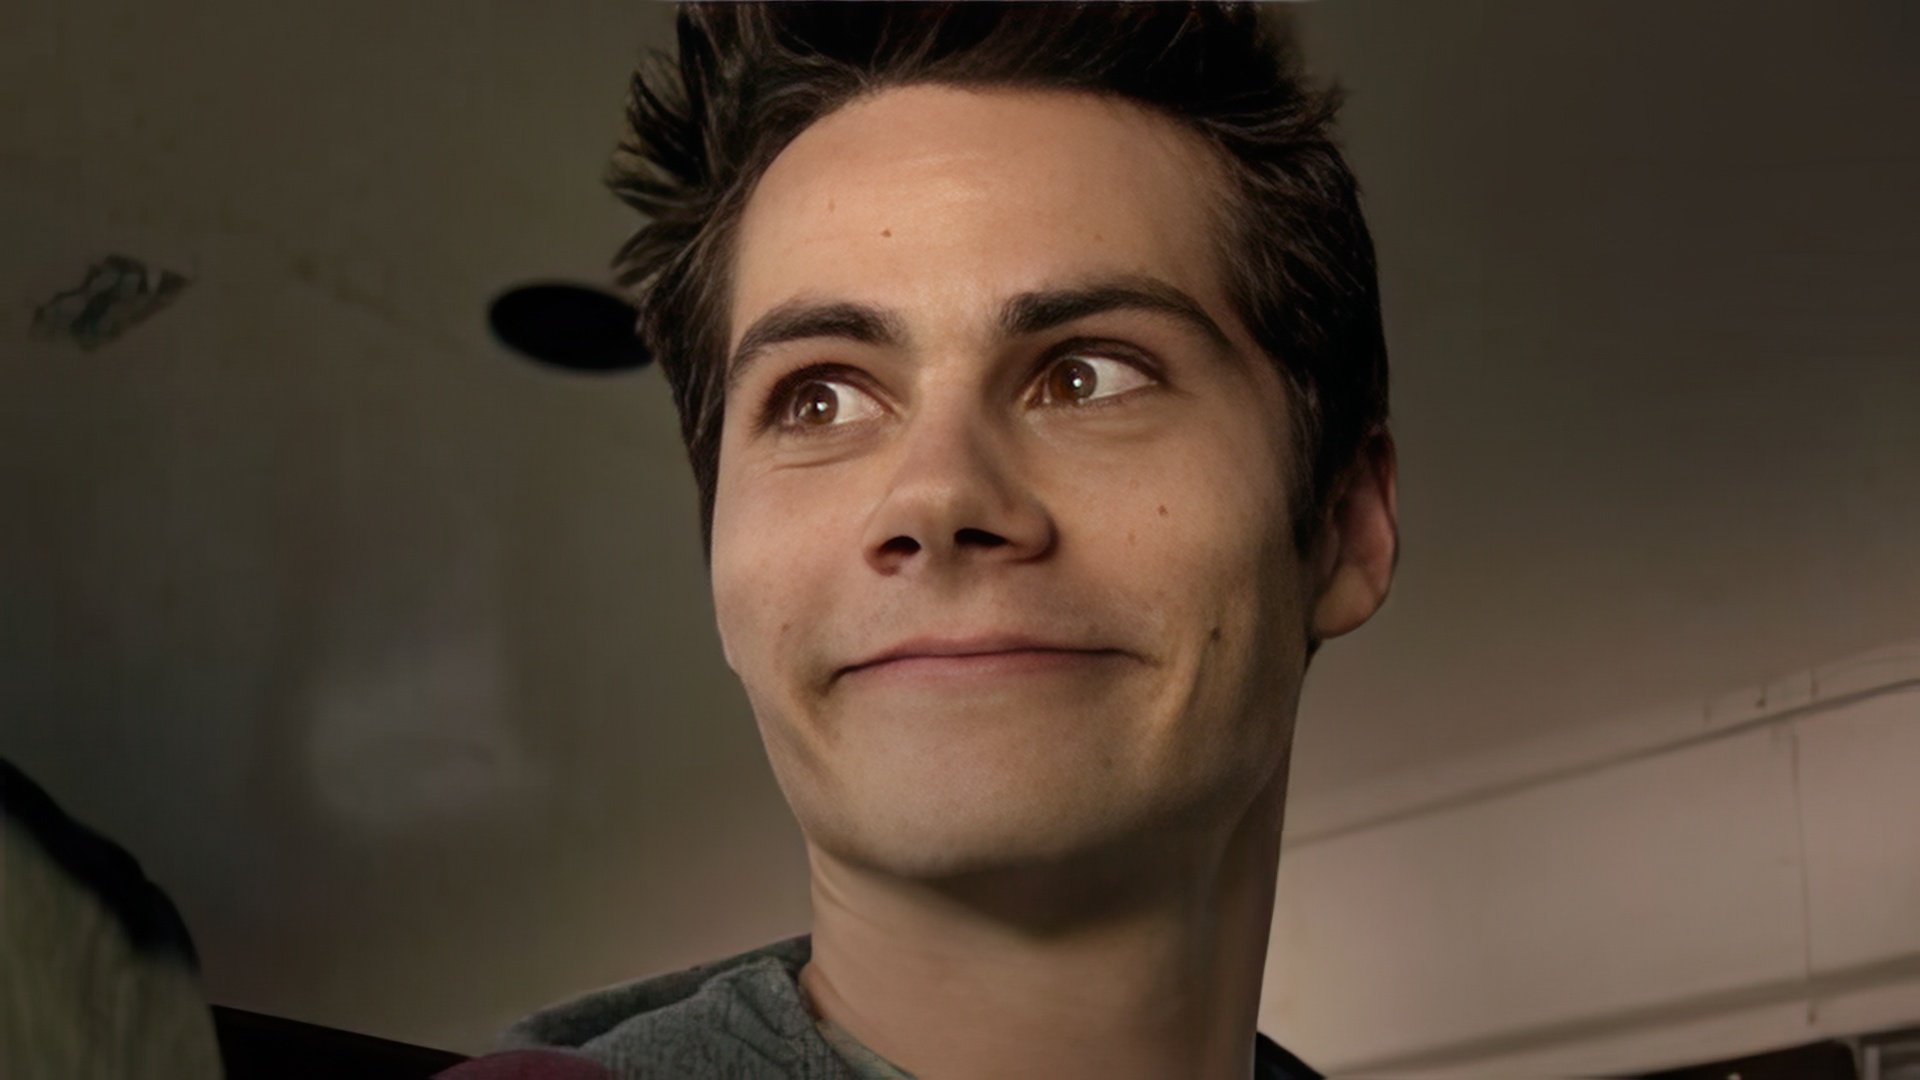 In 'Teen Wolf,' Dylan O'Brien played the main character's friend